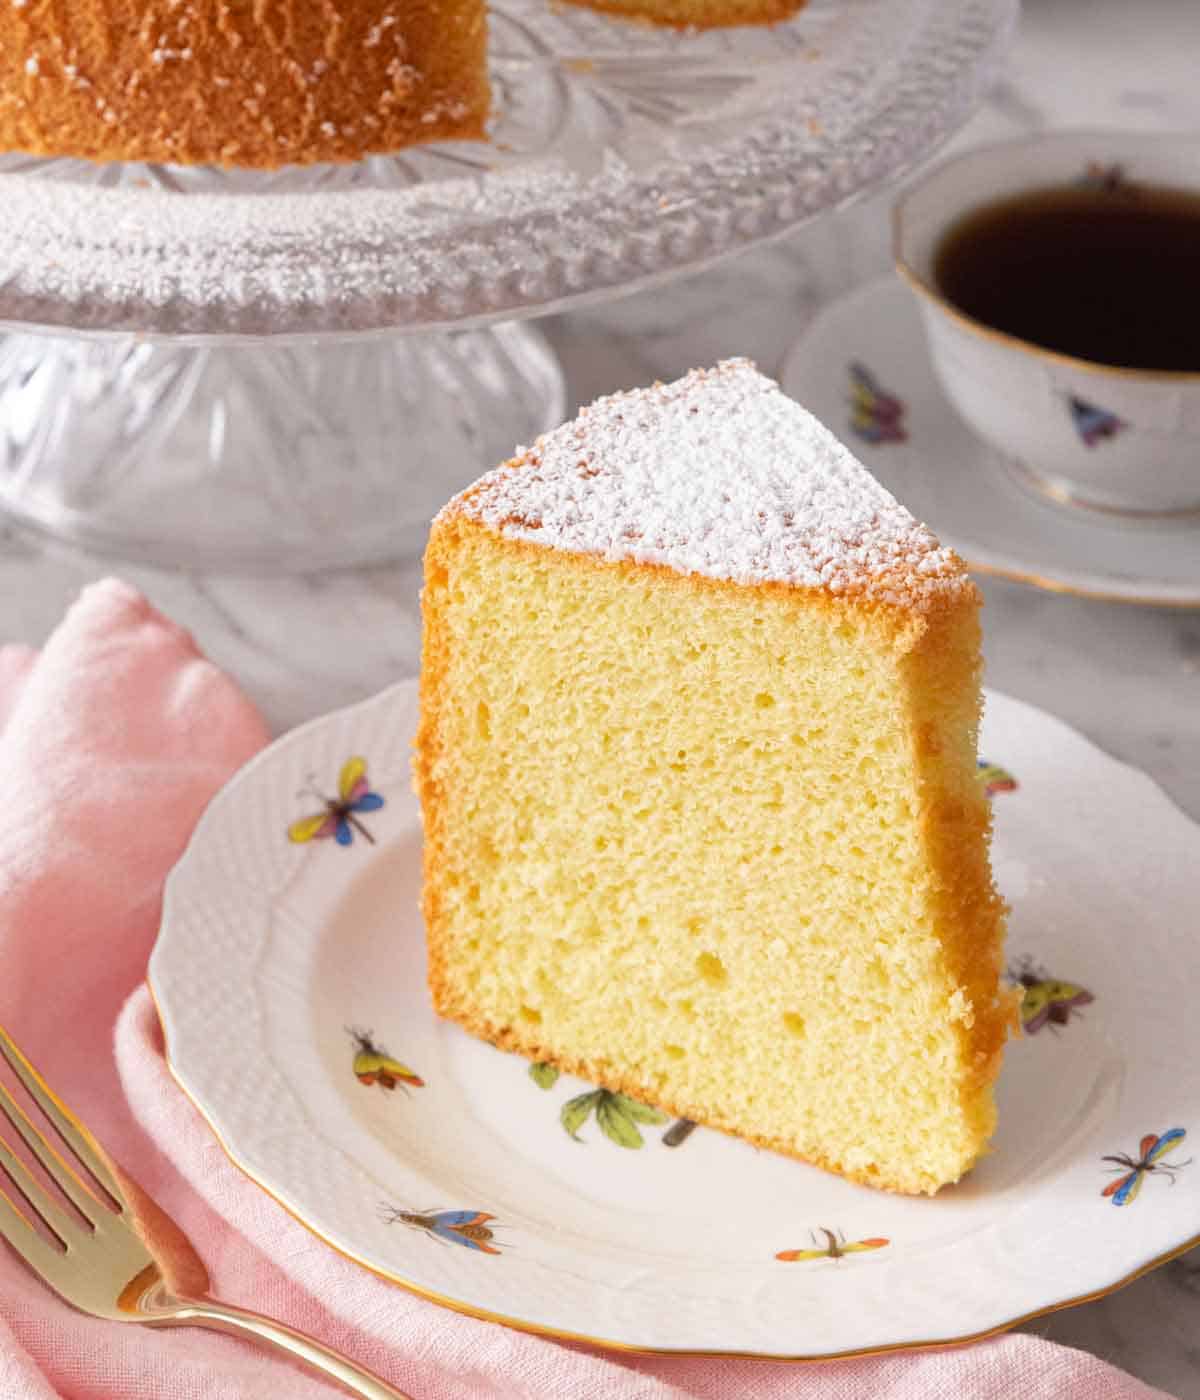 A slice of chiffon cake on a plate with powdered sugar on top.